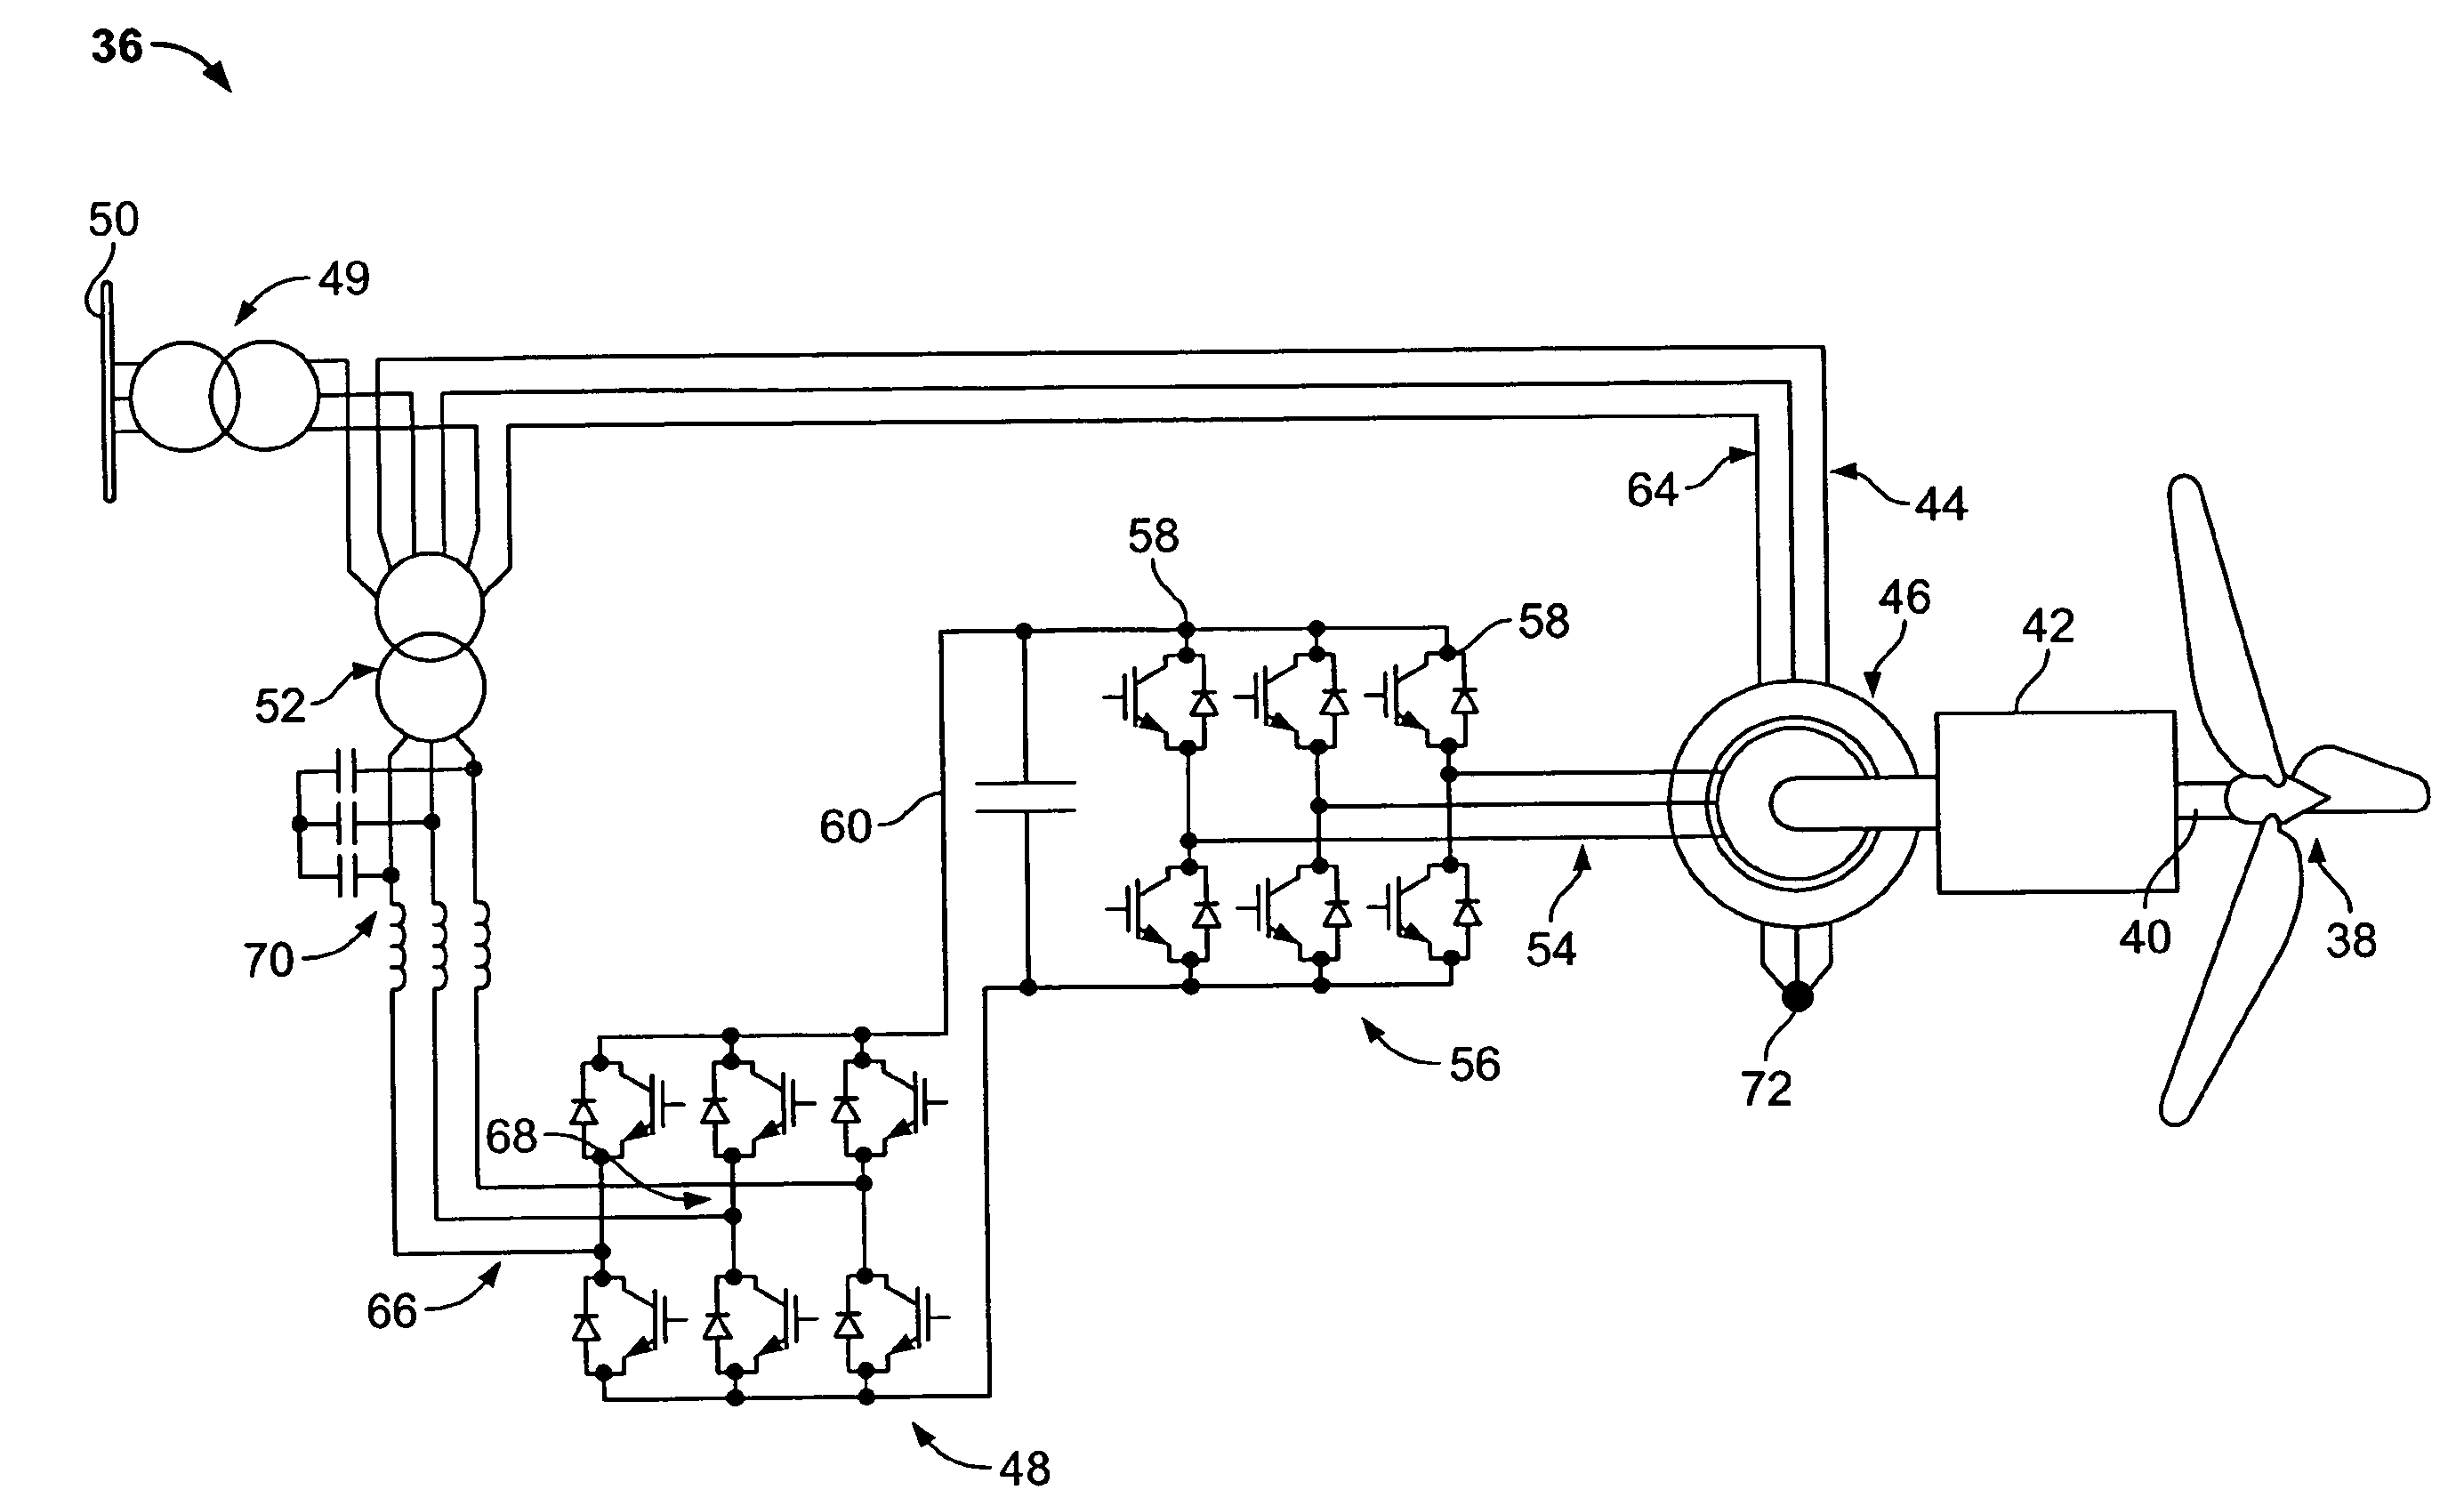 Power conditioning architecture for a wind turbine